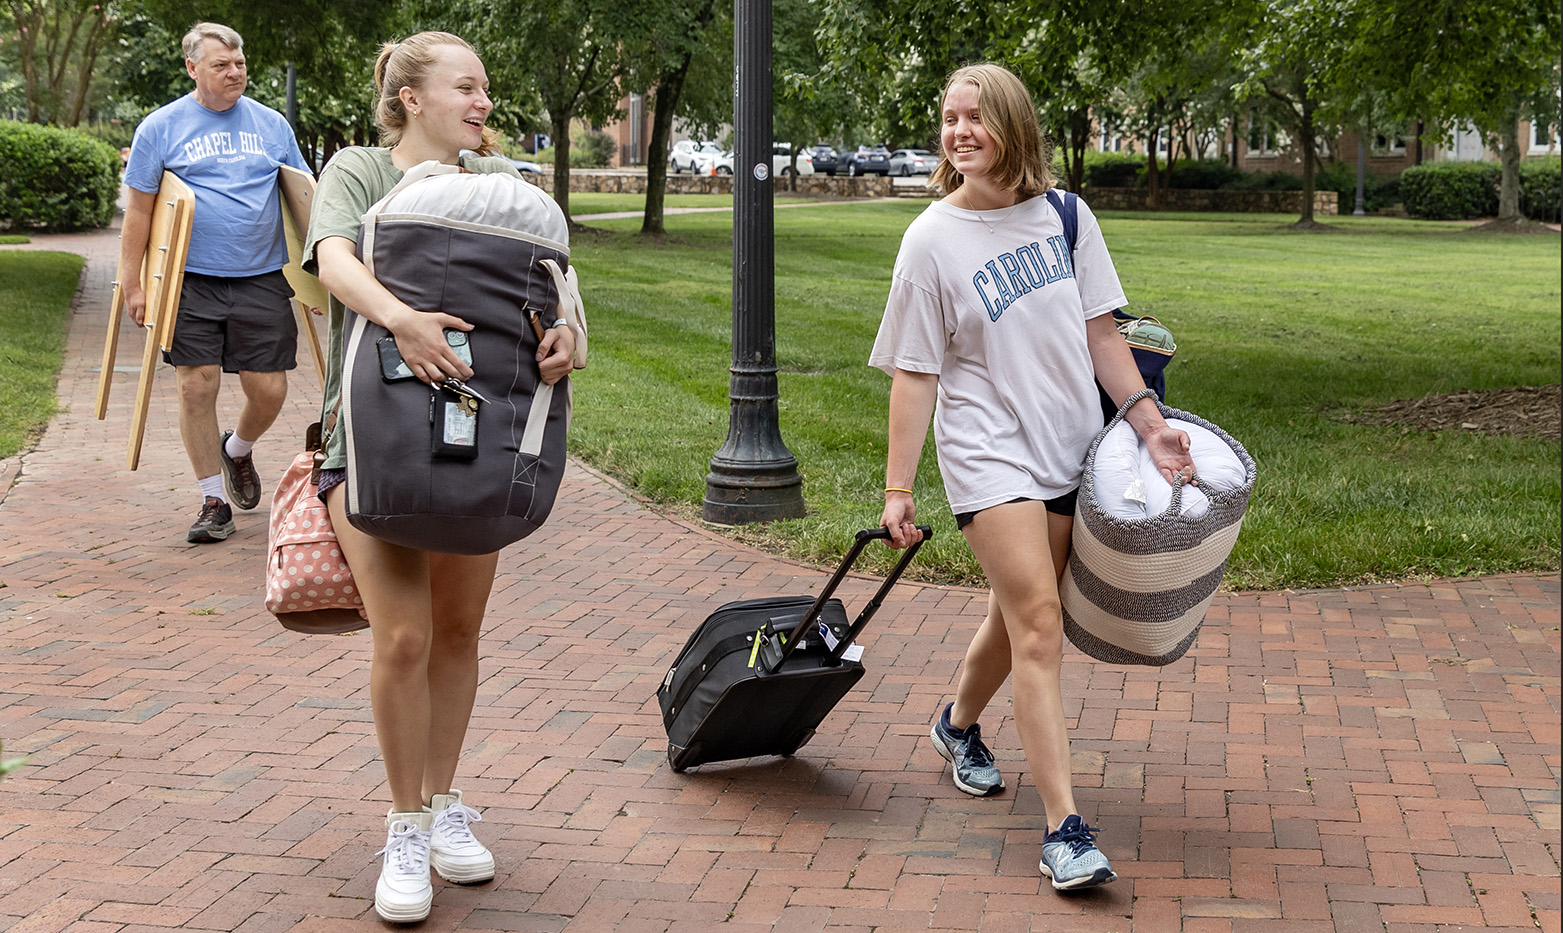 Two women students talking to one another while carrying move-in goods.